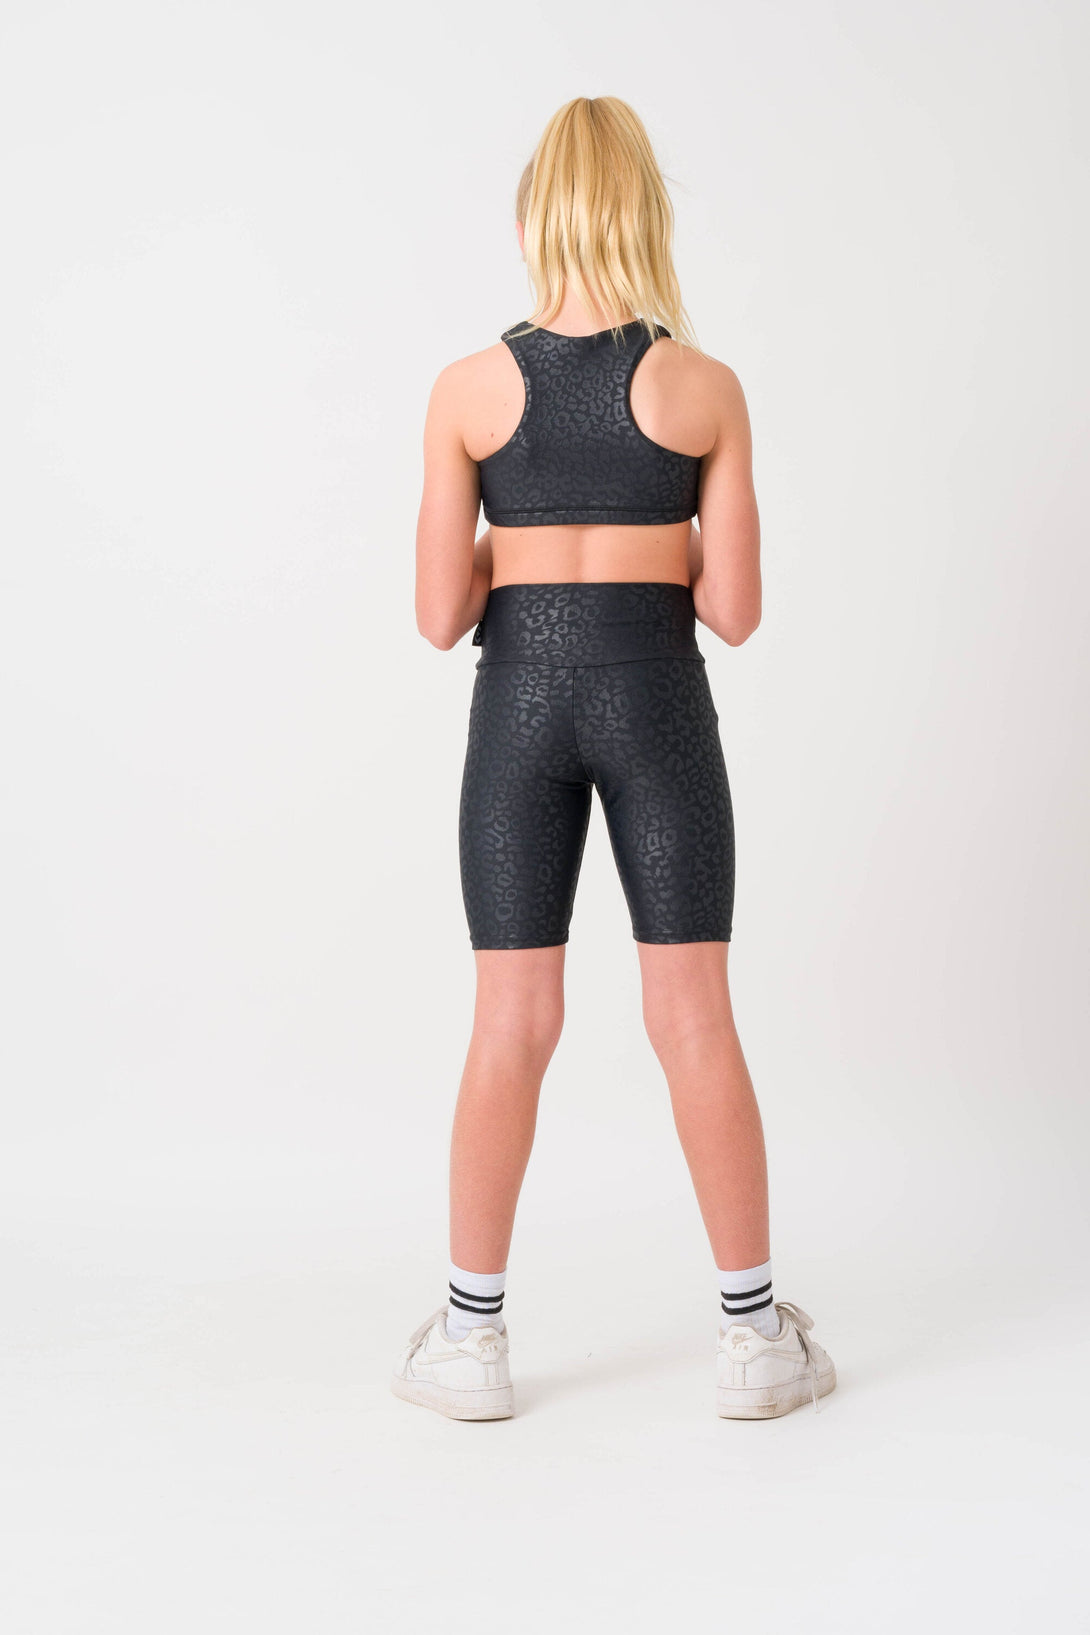 Black Exotic Touch Jag - Kids Long Shorts-Activewear-Exoticathletica